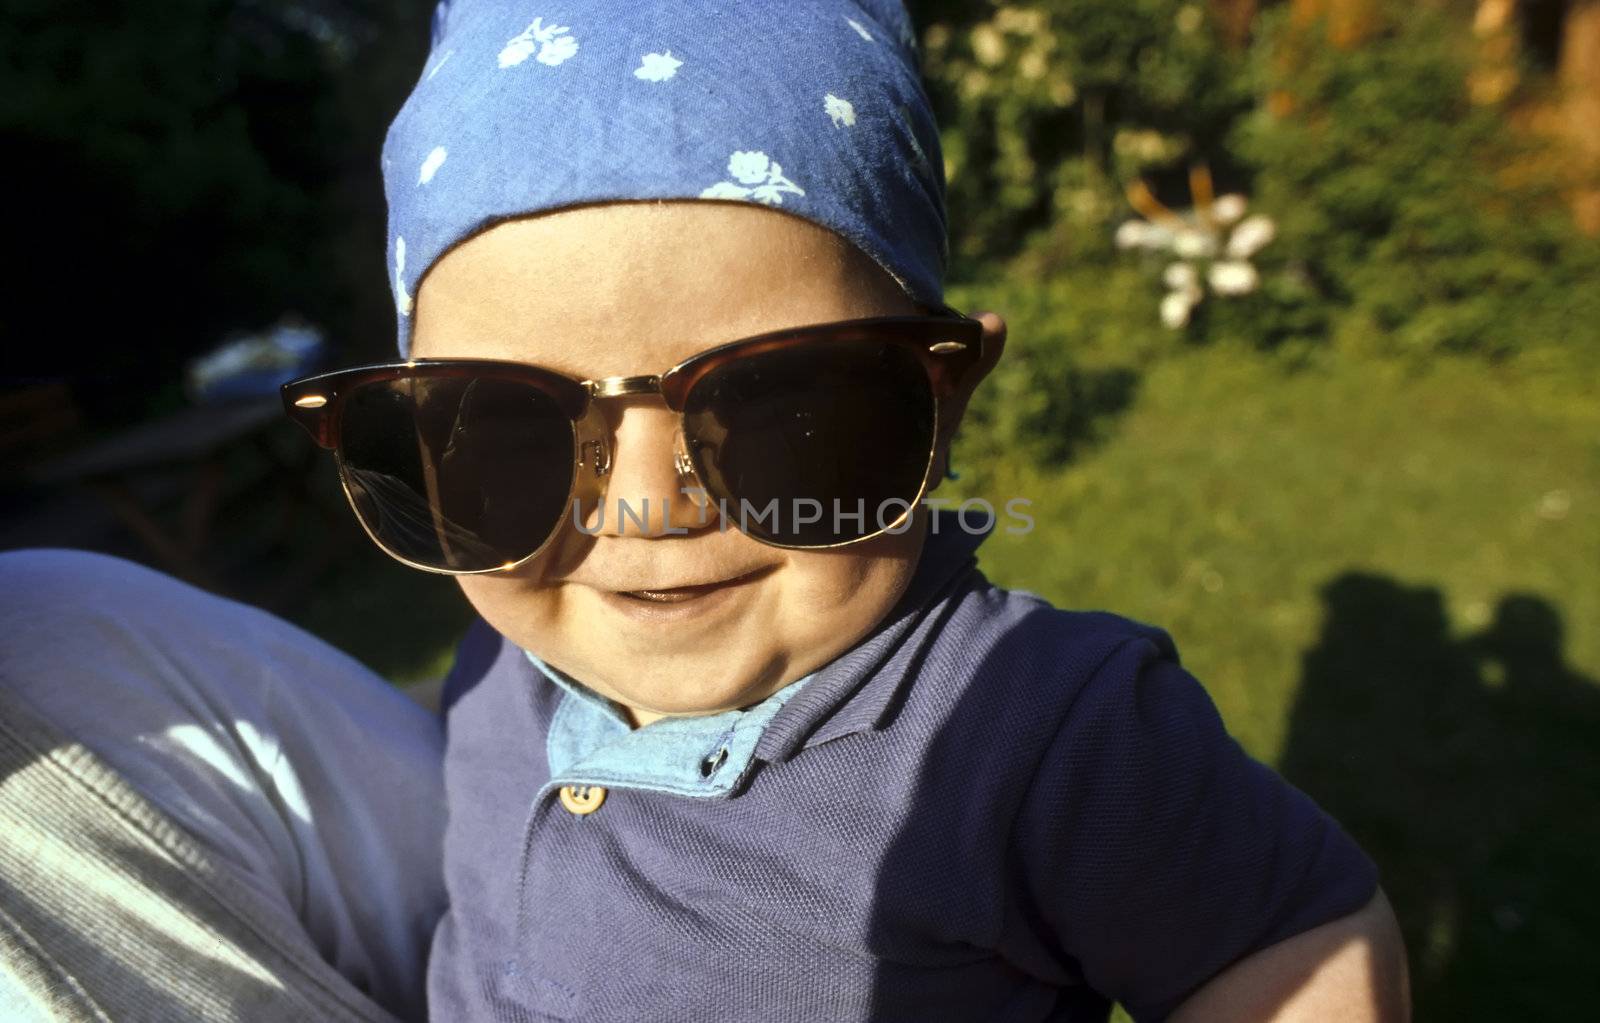 boy with huge sunglasses in the garden